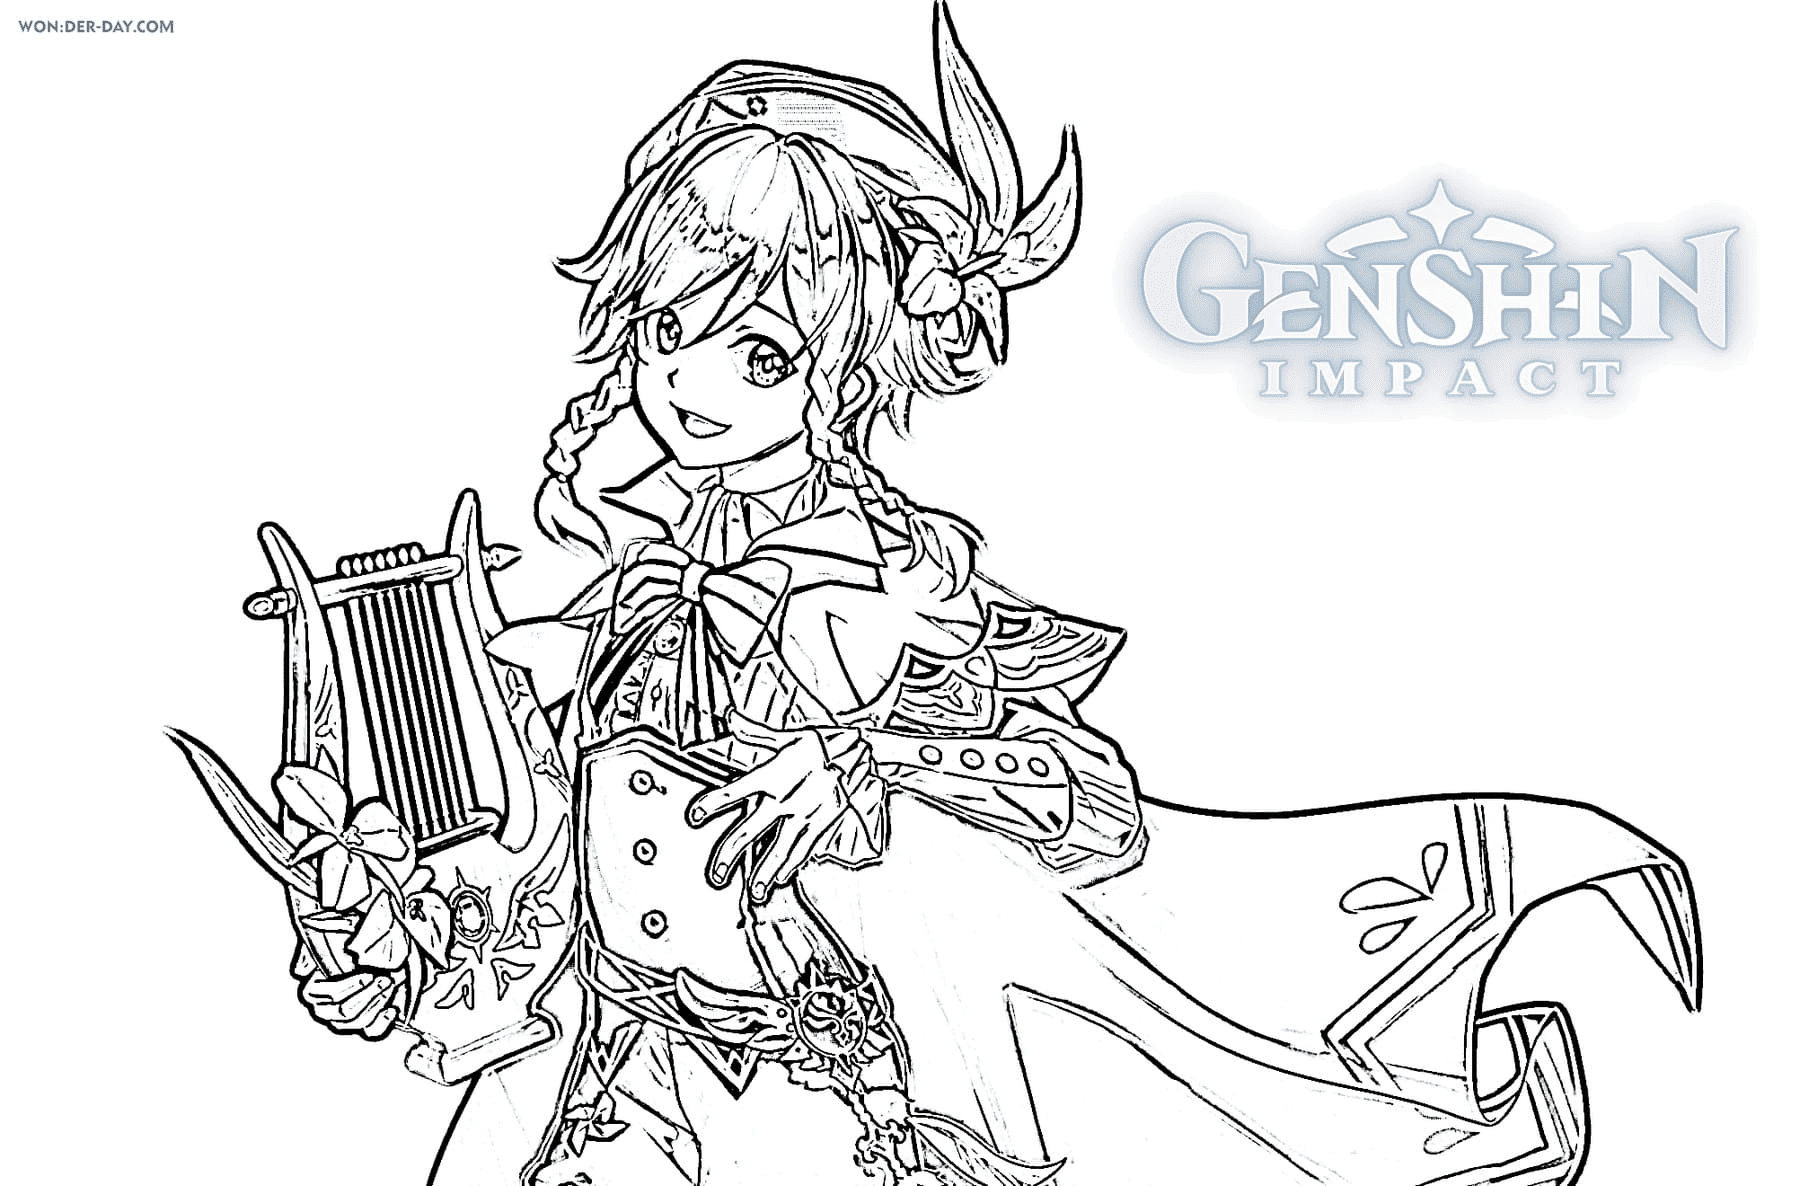 Genshin Impact Coloring Pages - Free Printable Coloring Pages